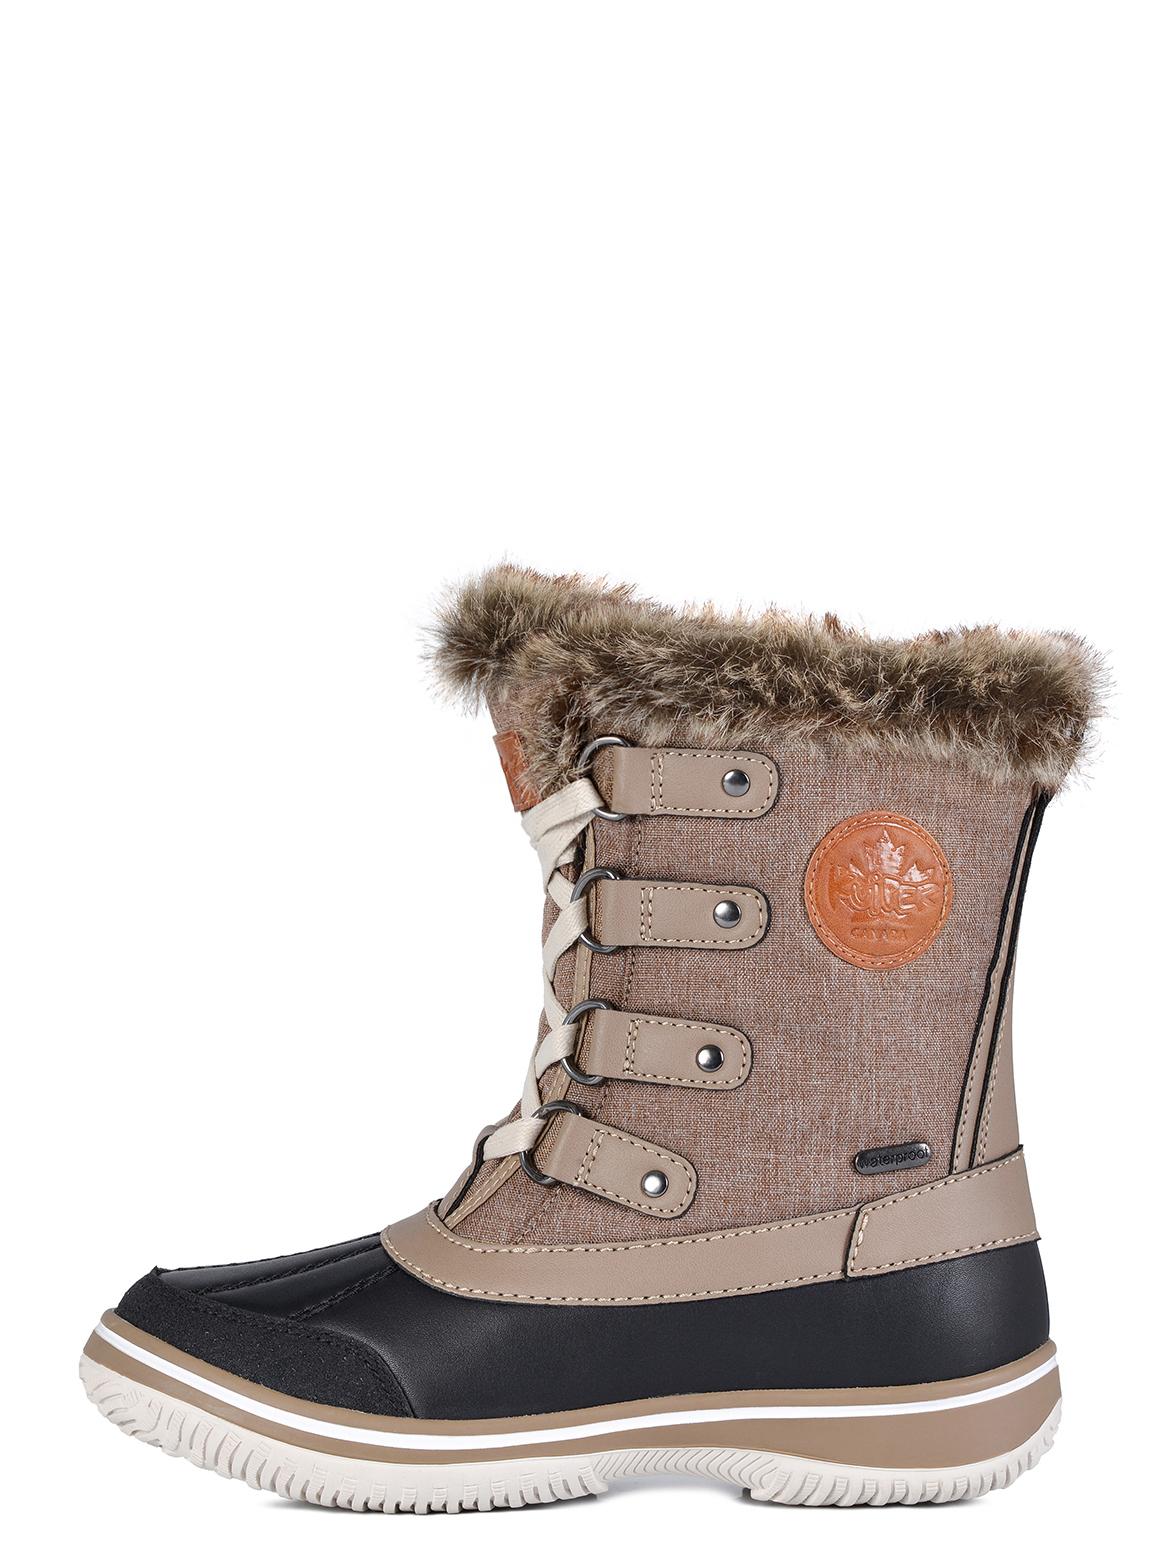 DSW shoes for WOMENS - Winter Boots shoes